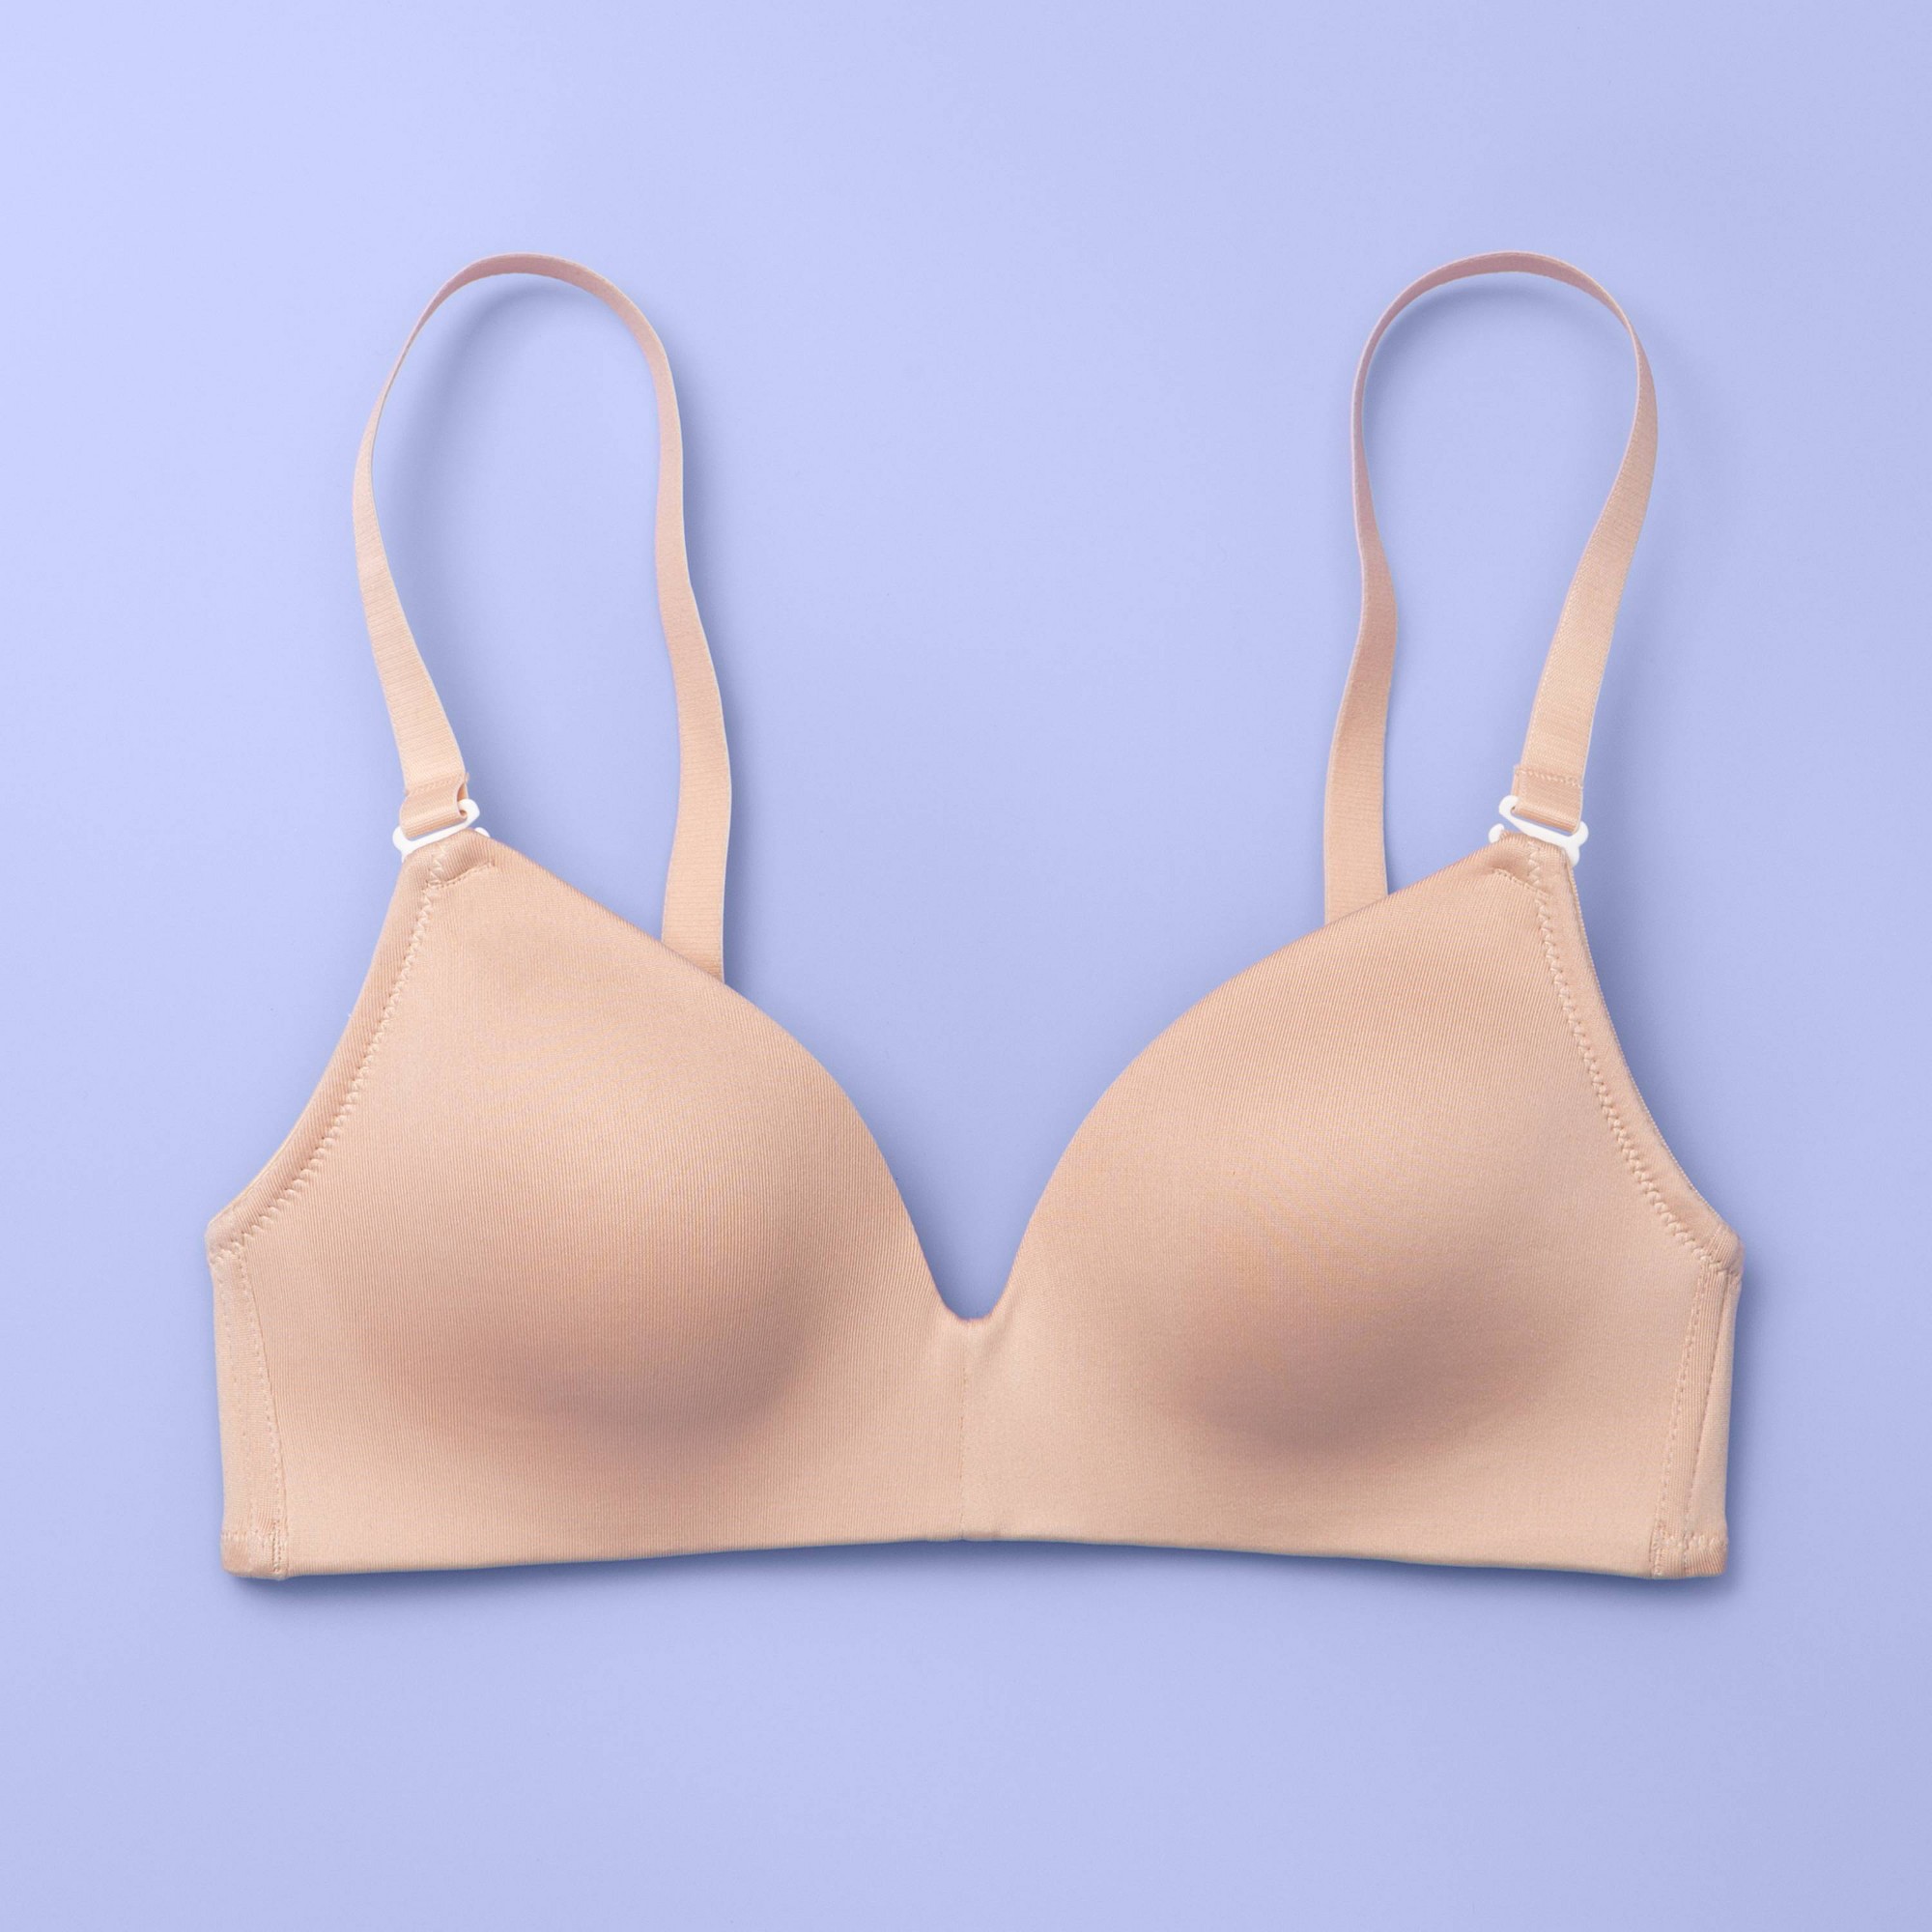 Girls' Molded Bra - More Than Magic Beige 36A, Girl's, by More